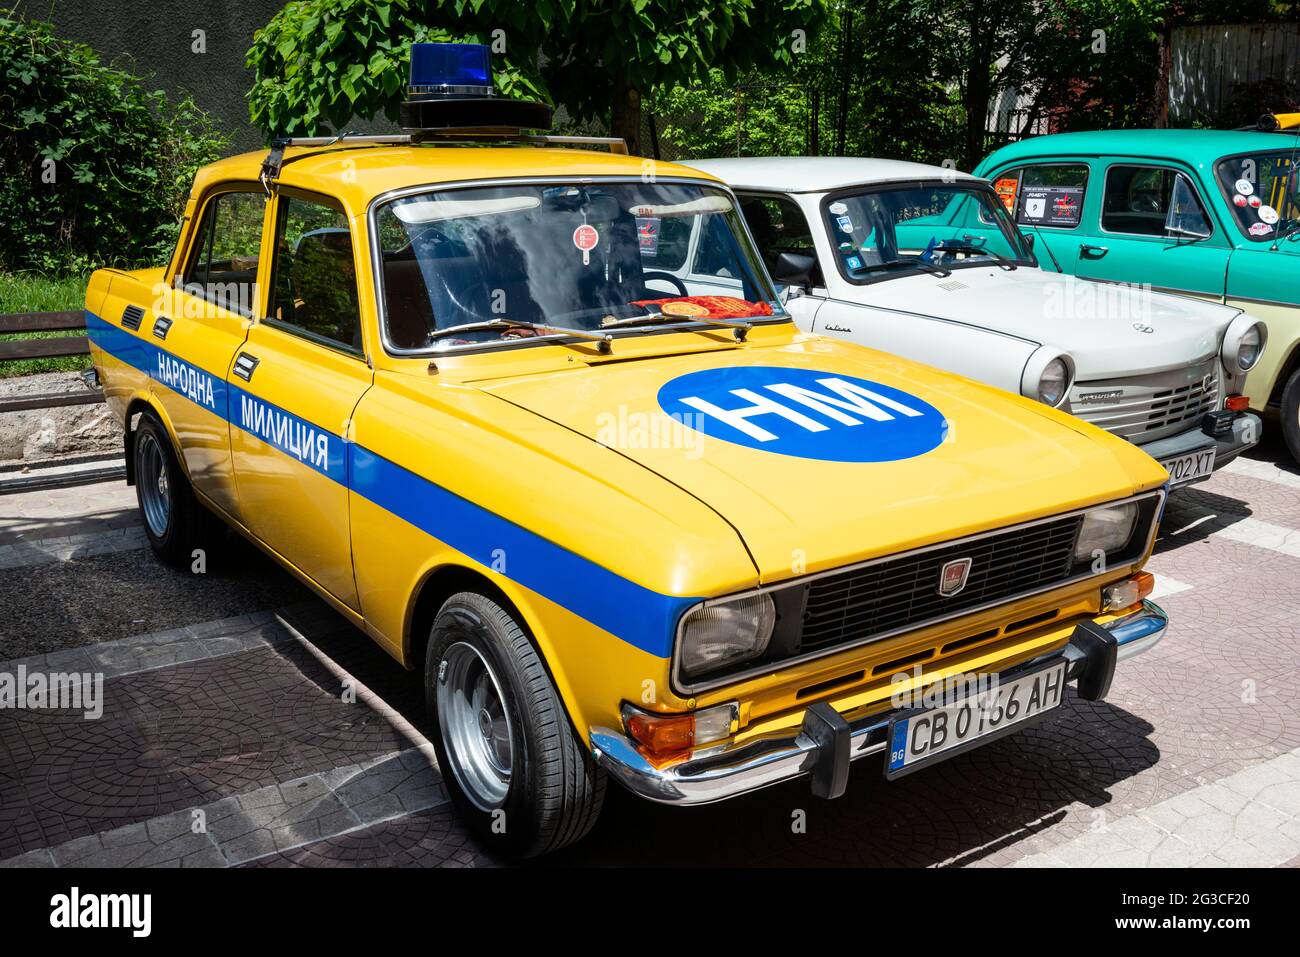 Moskvitch AZLK 2140 Bulgarian Police car from the 80s socialist era on display during the annual retro cars parade in Bulgaria as of May 2021 Stock Photo